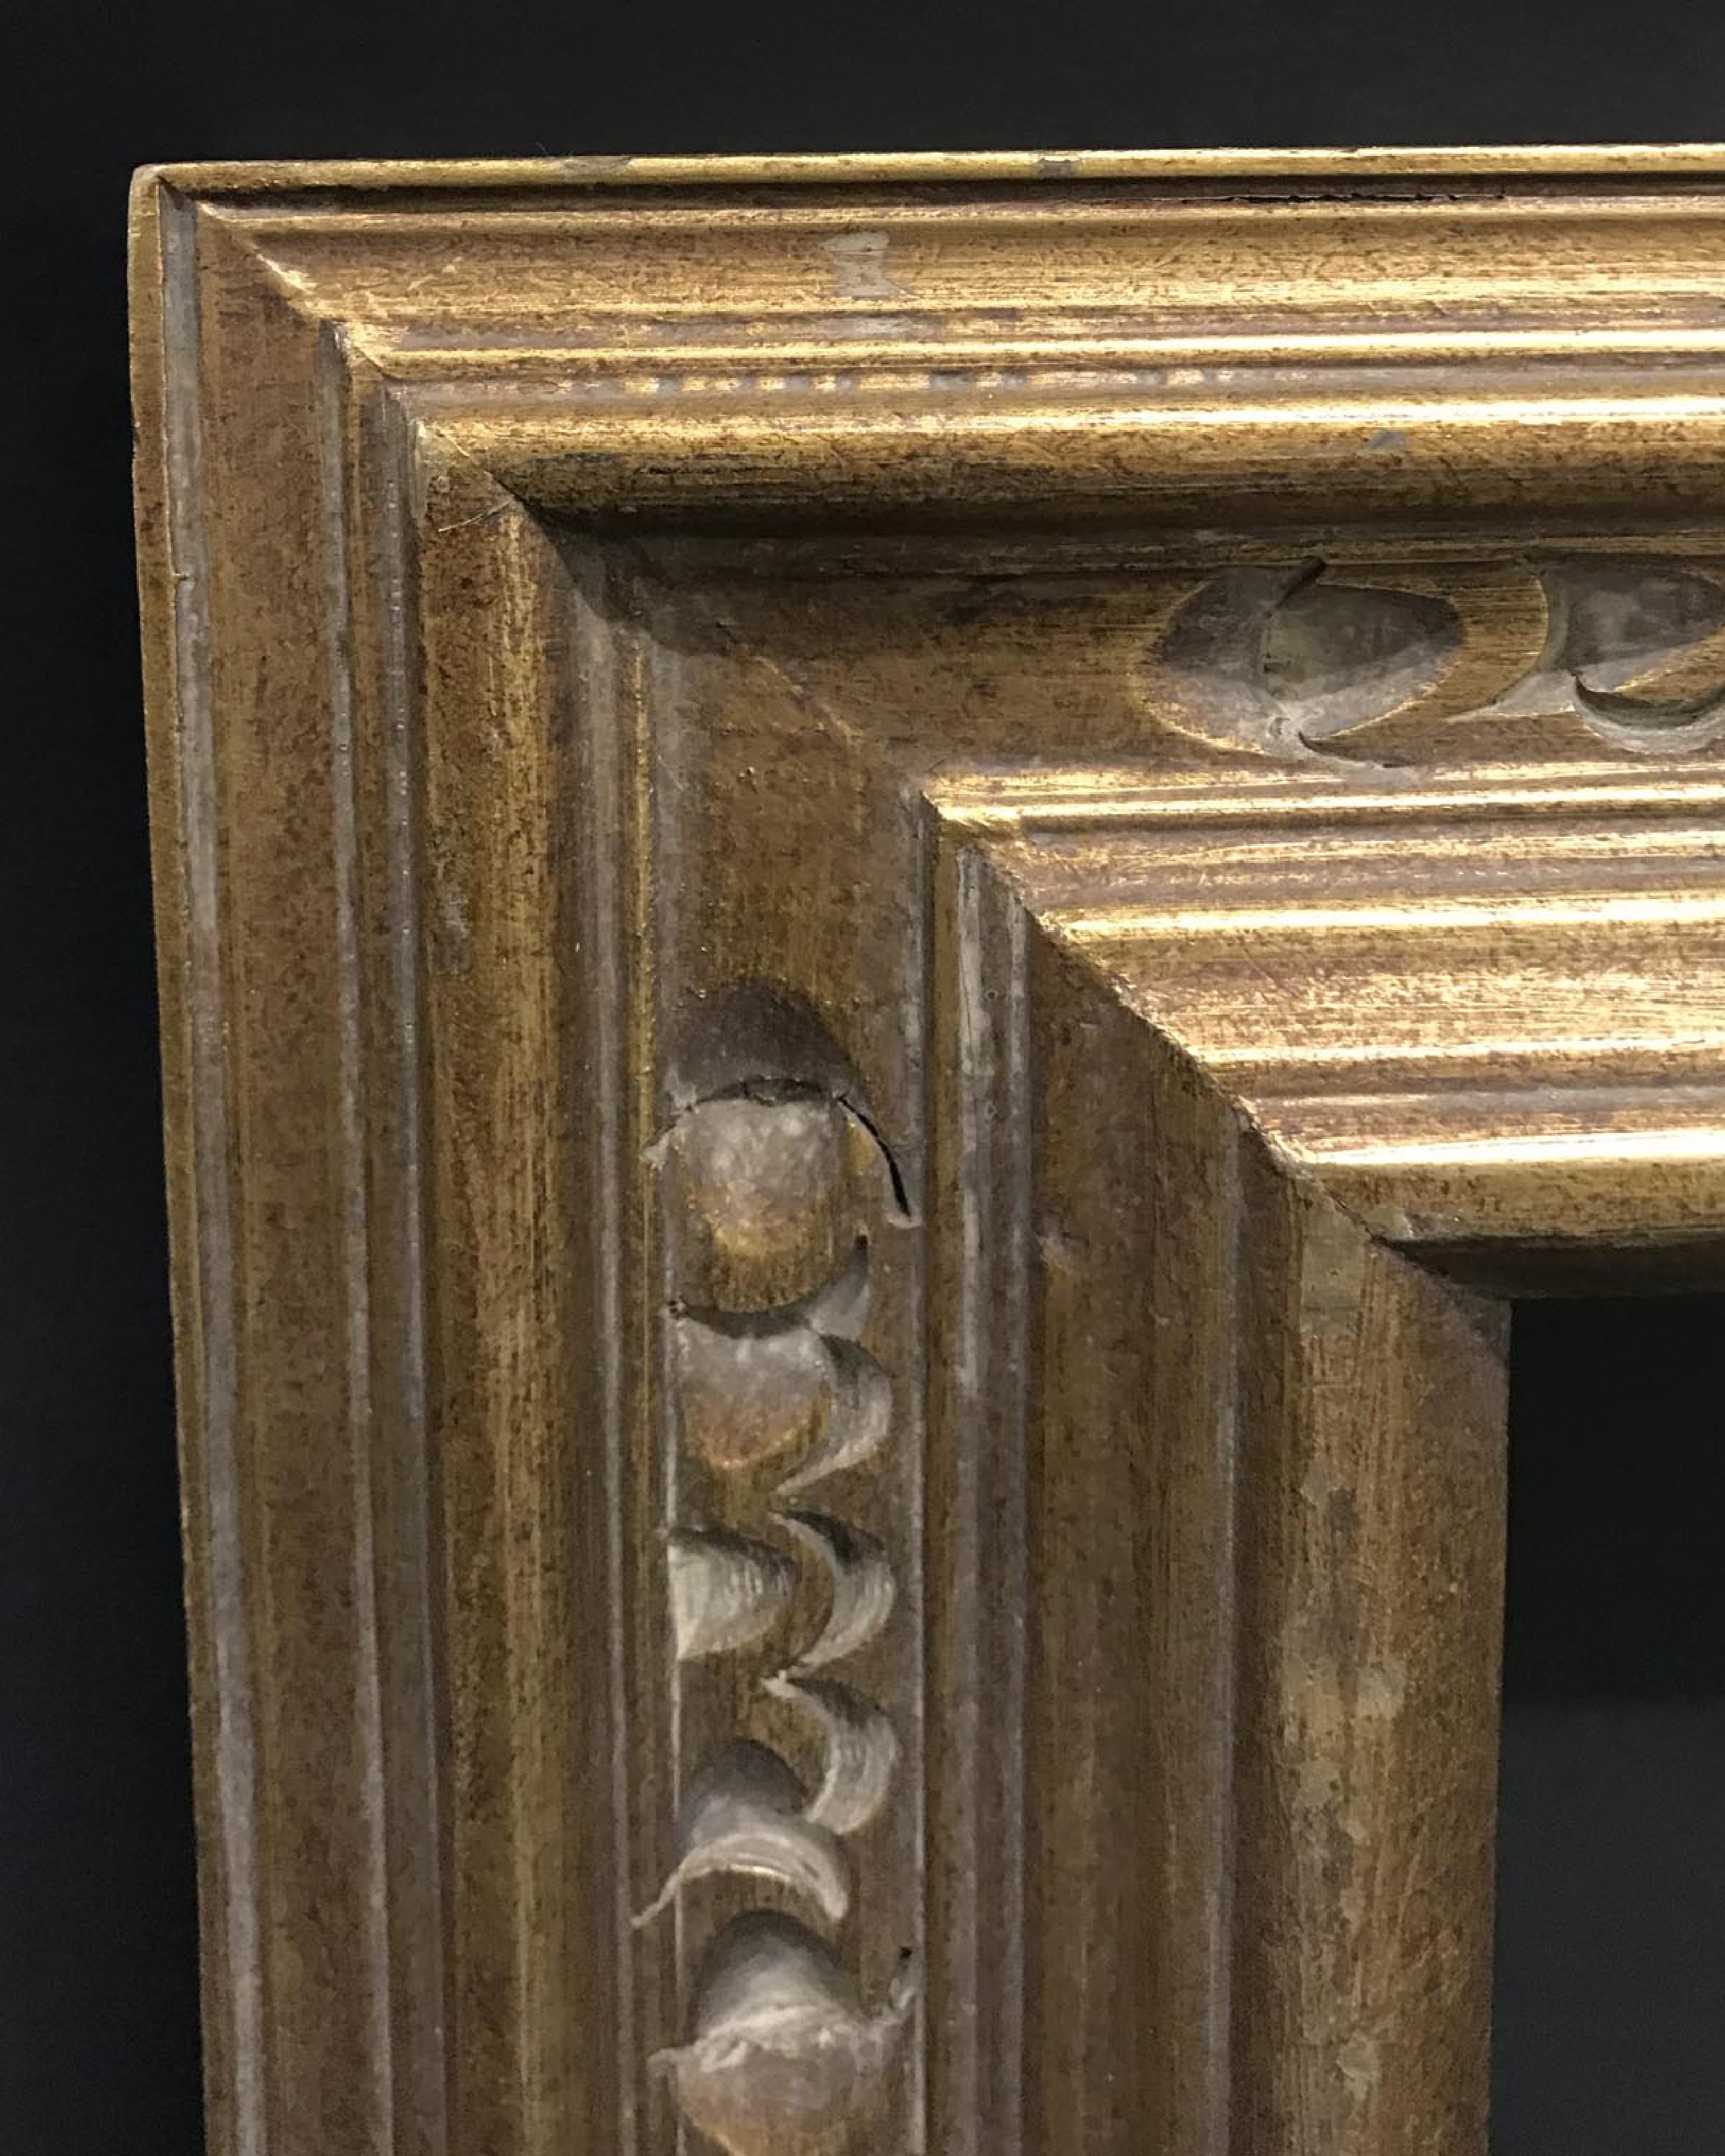 20th Century English School. A Gilt Composition Frame, 12" x 10", and another Frame, 9.25" x 7.